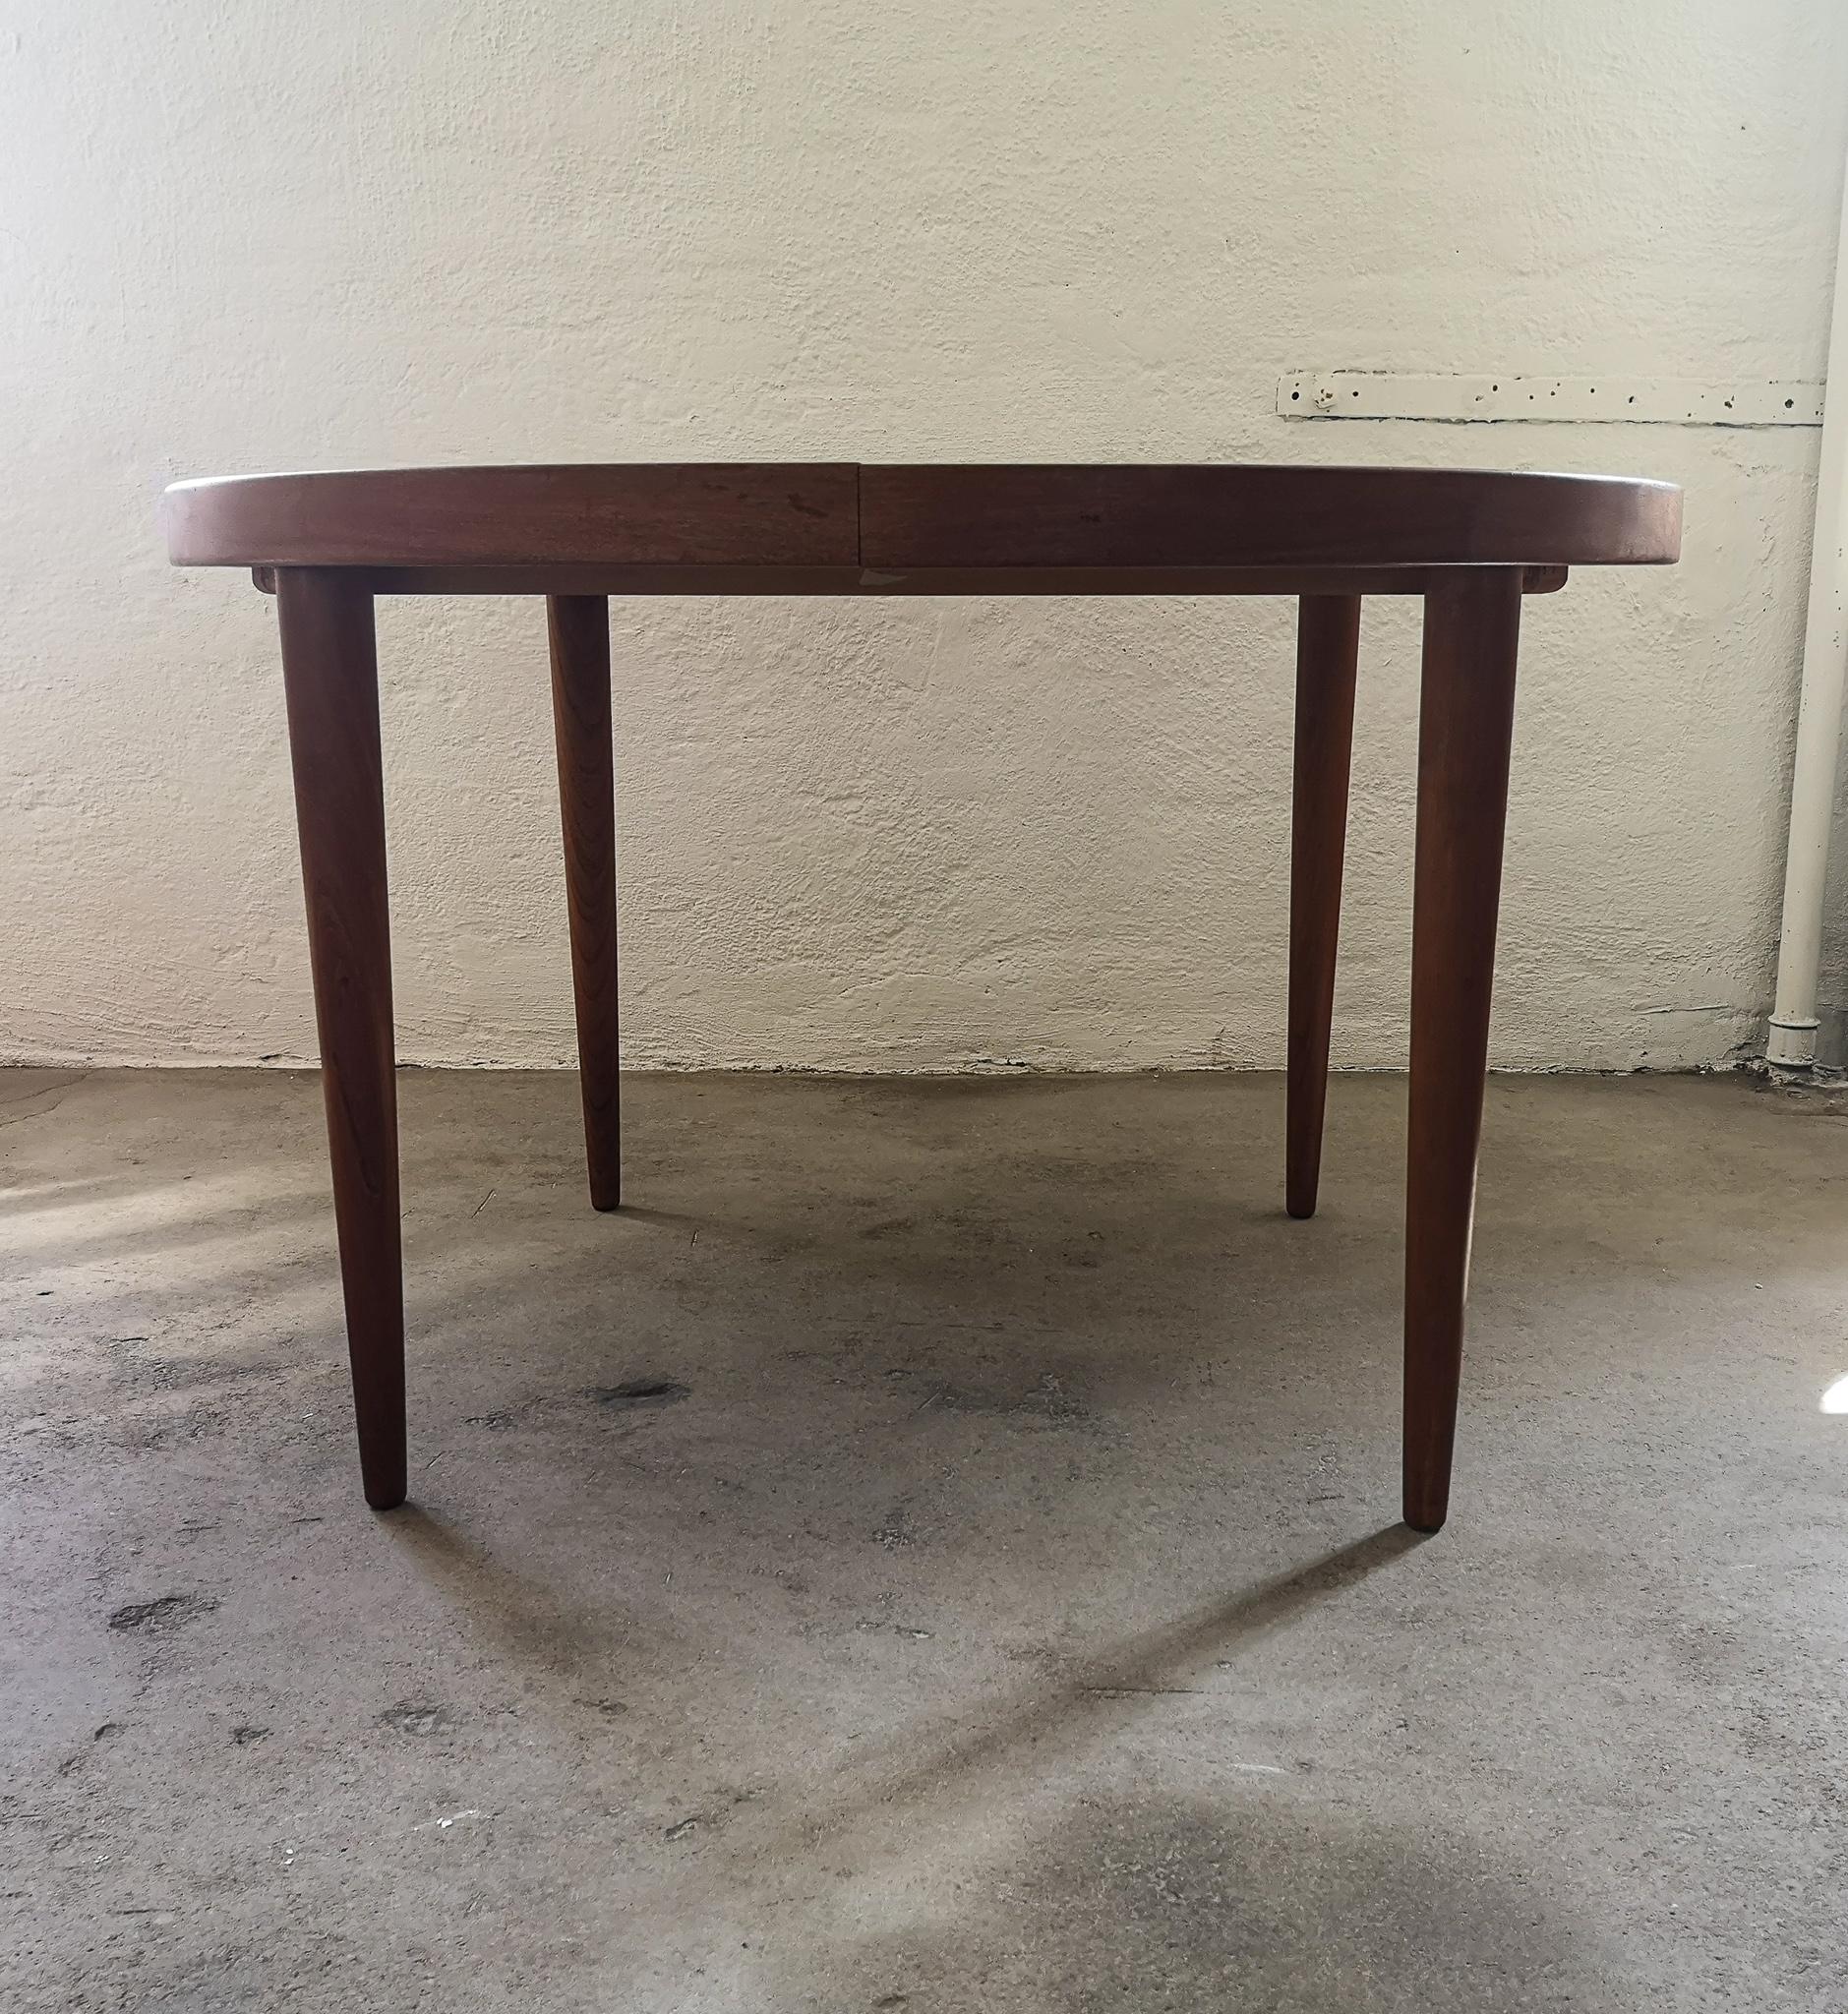 Wonderful dinner table designed by Kai Kristiansen and produced in Denmark, 1960s.
The table comes with two additional 2 extensions, one of them with beautiful rim to give a luxurious look.
It has the deep beautiful look of teak.

Exceptionally